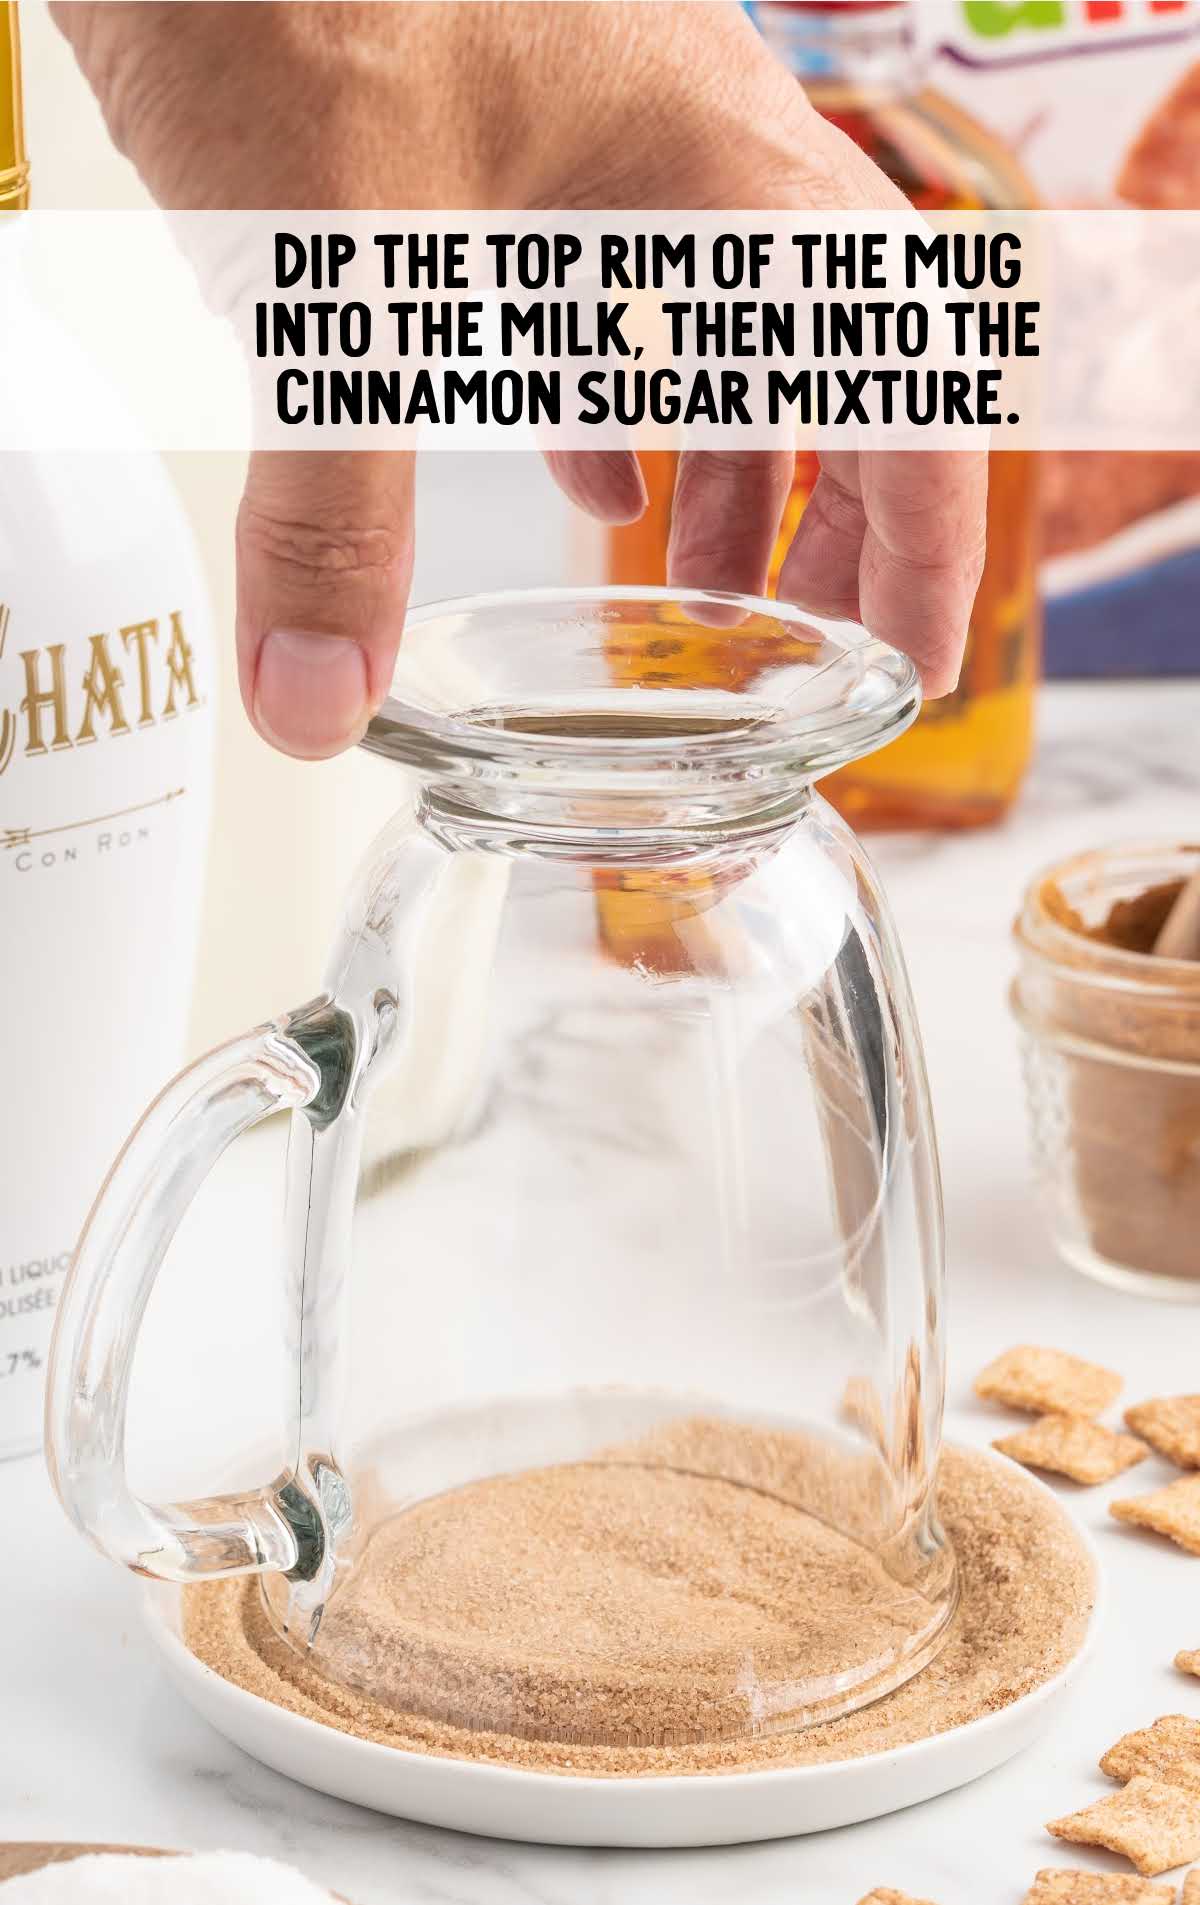 rim dipped into the milk and then cinnamon sugar mixture